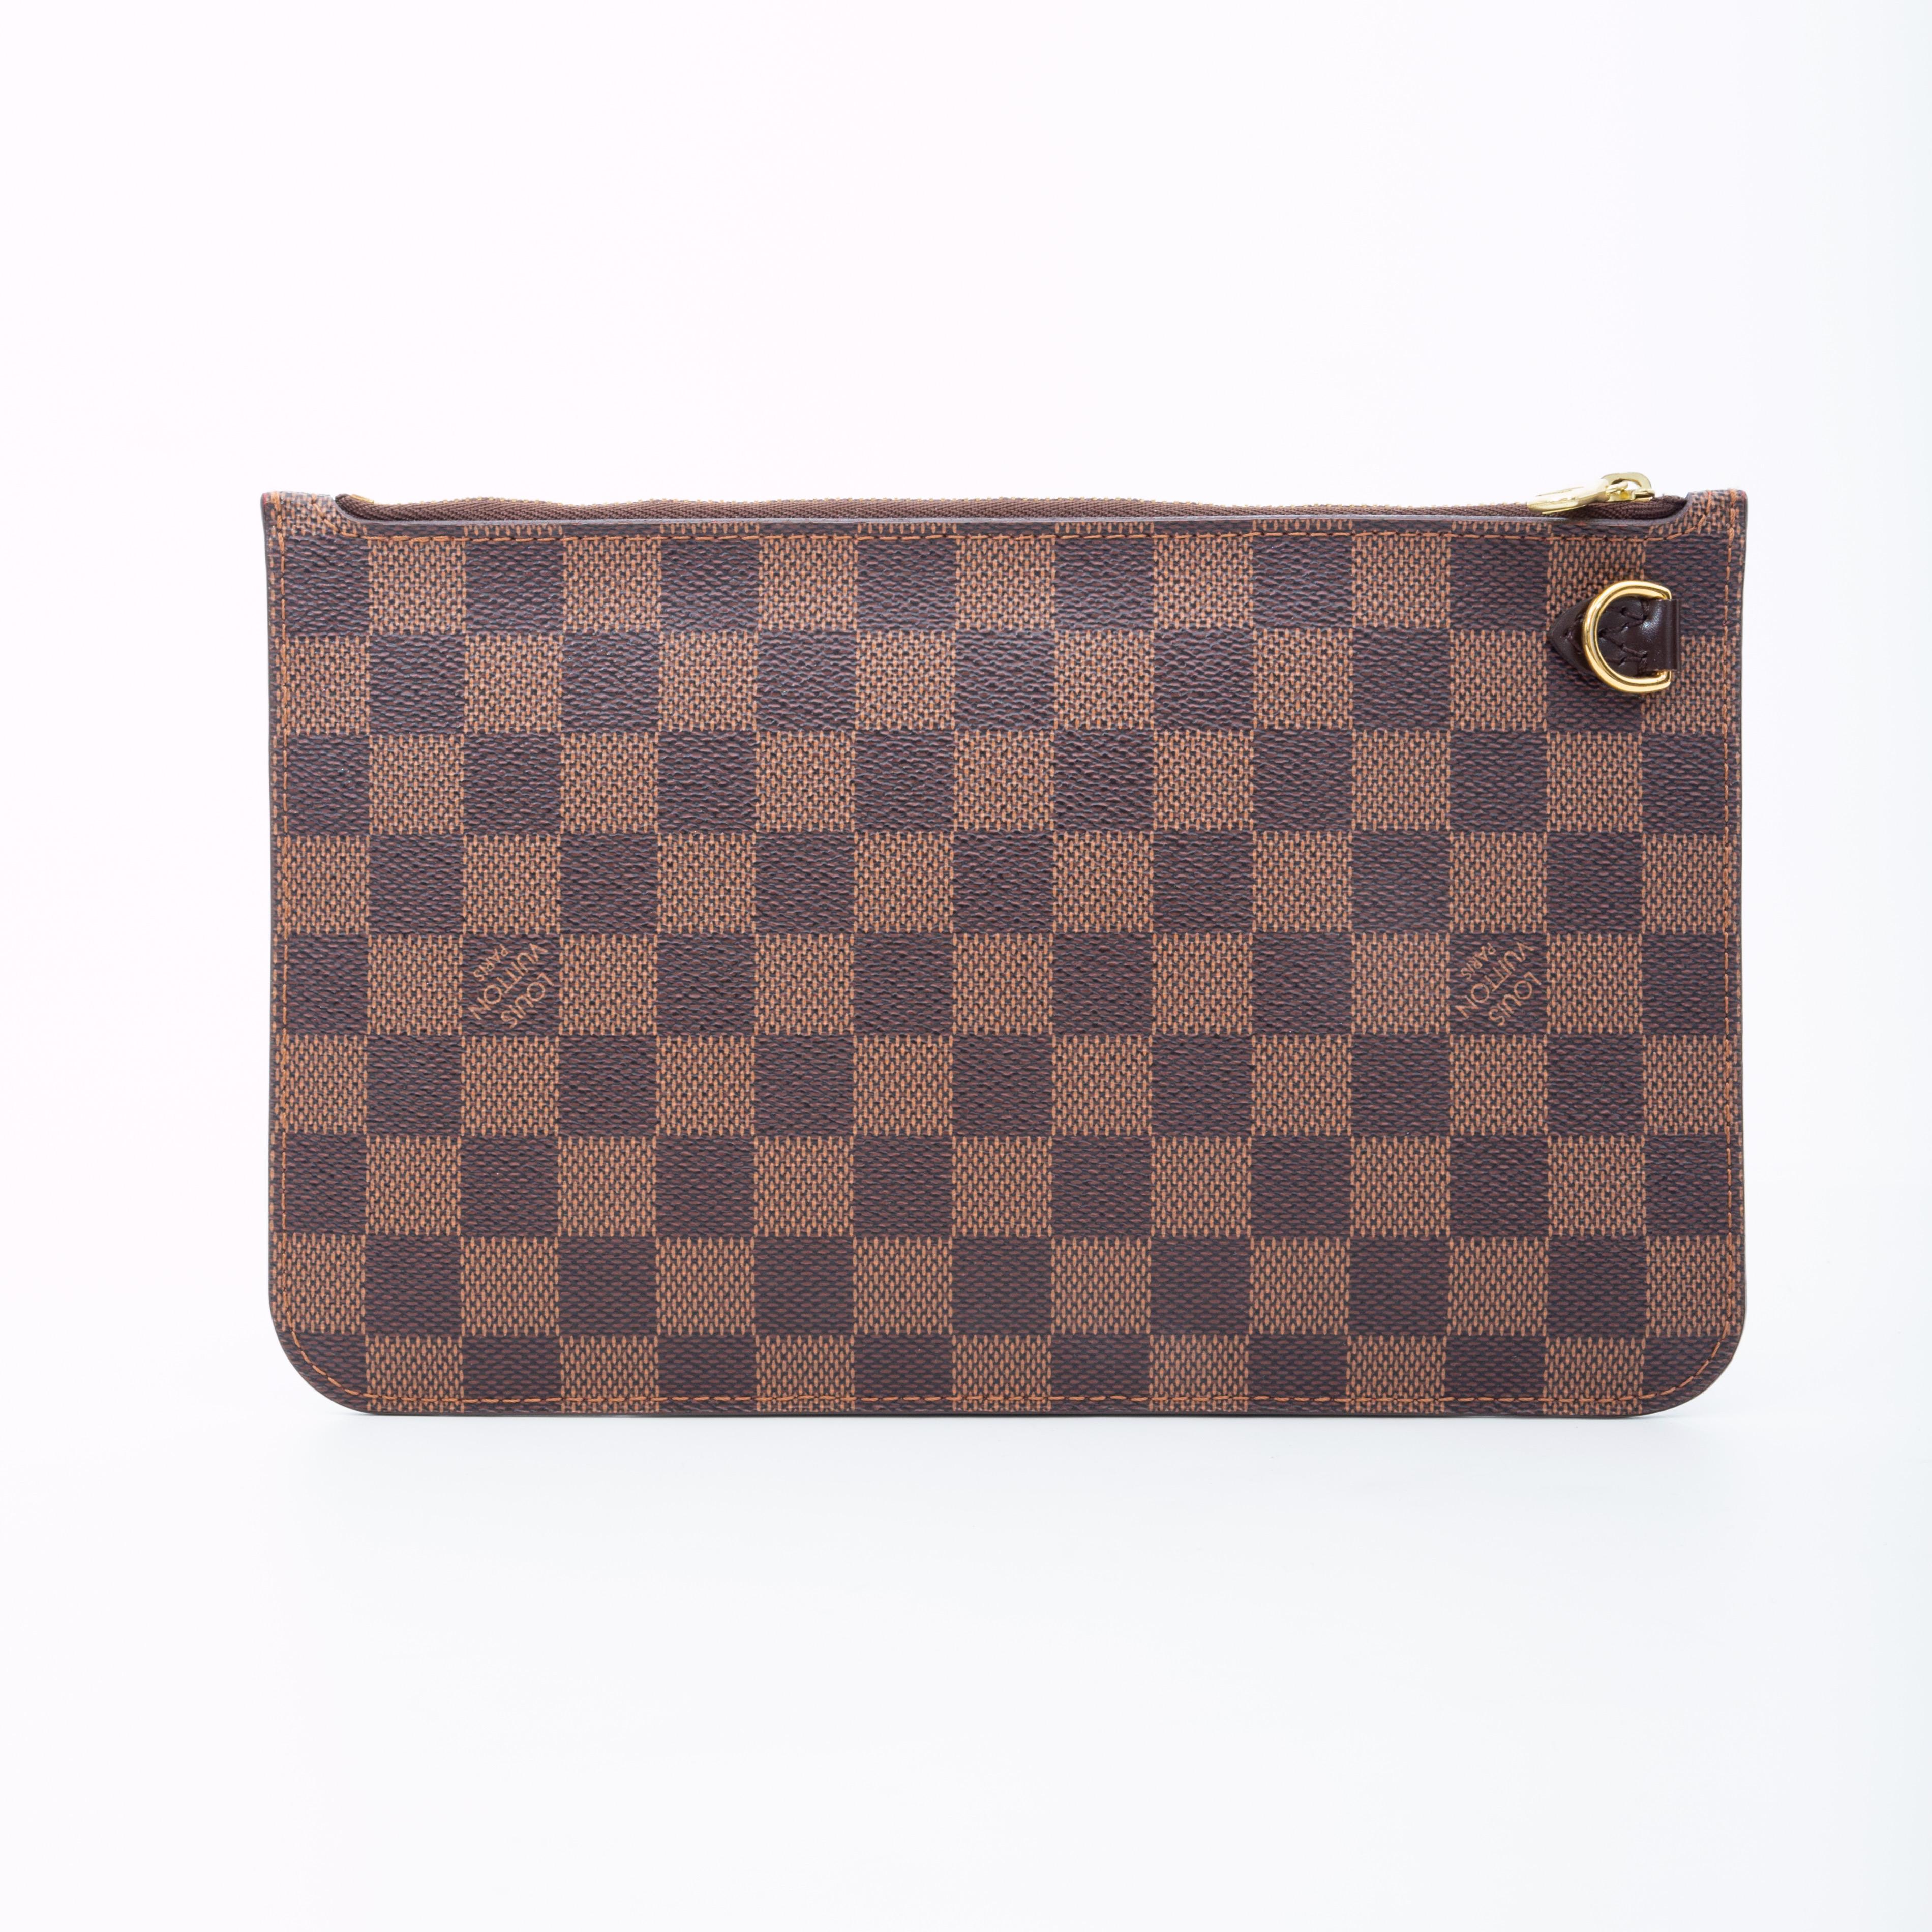 Louis Vuitton 2014 - 9 For Sale on 1stDibs | louis vuitton 2014 bags prices